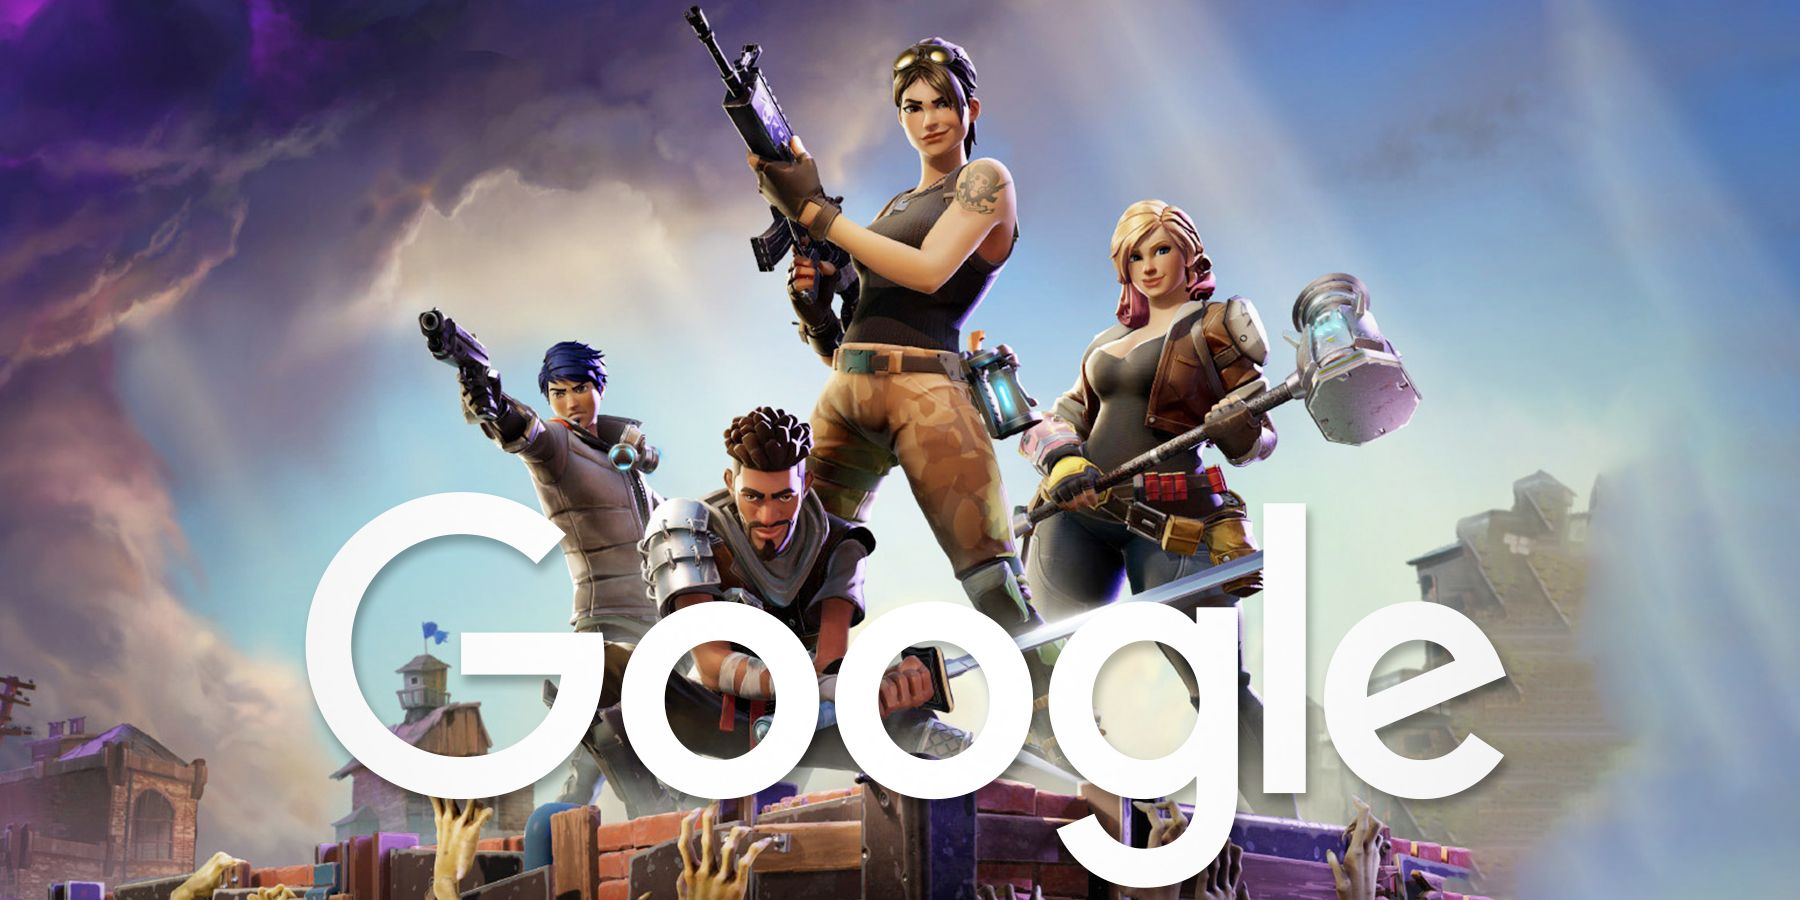 Epic decision lands Fortnite in the Google Play Store - PhoneArena